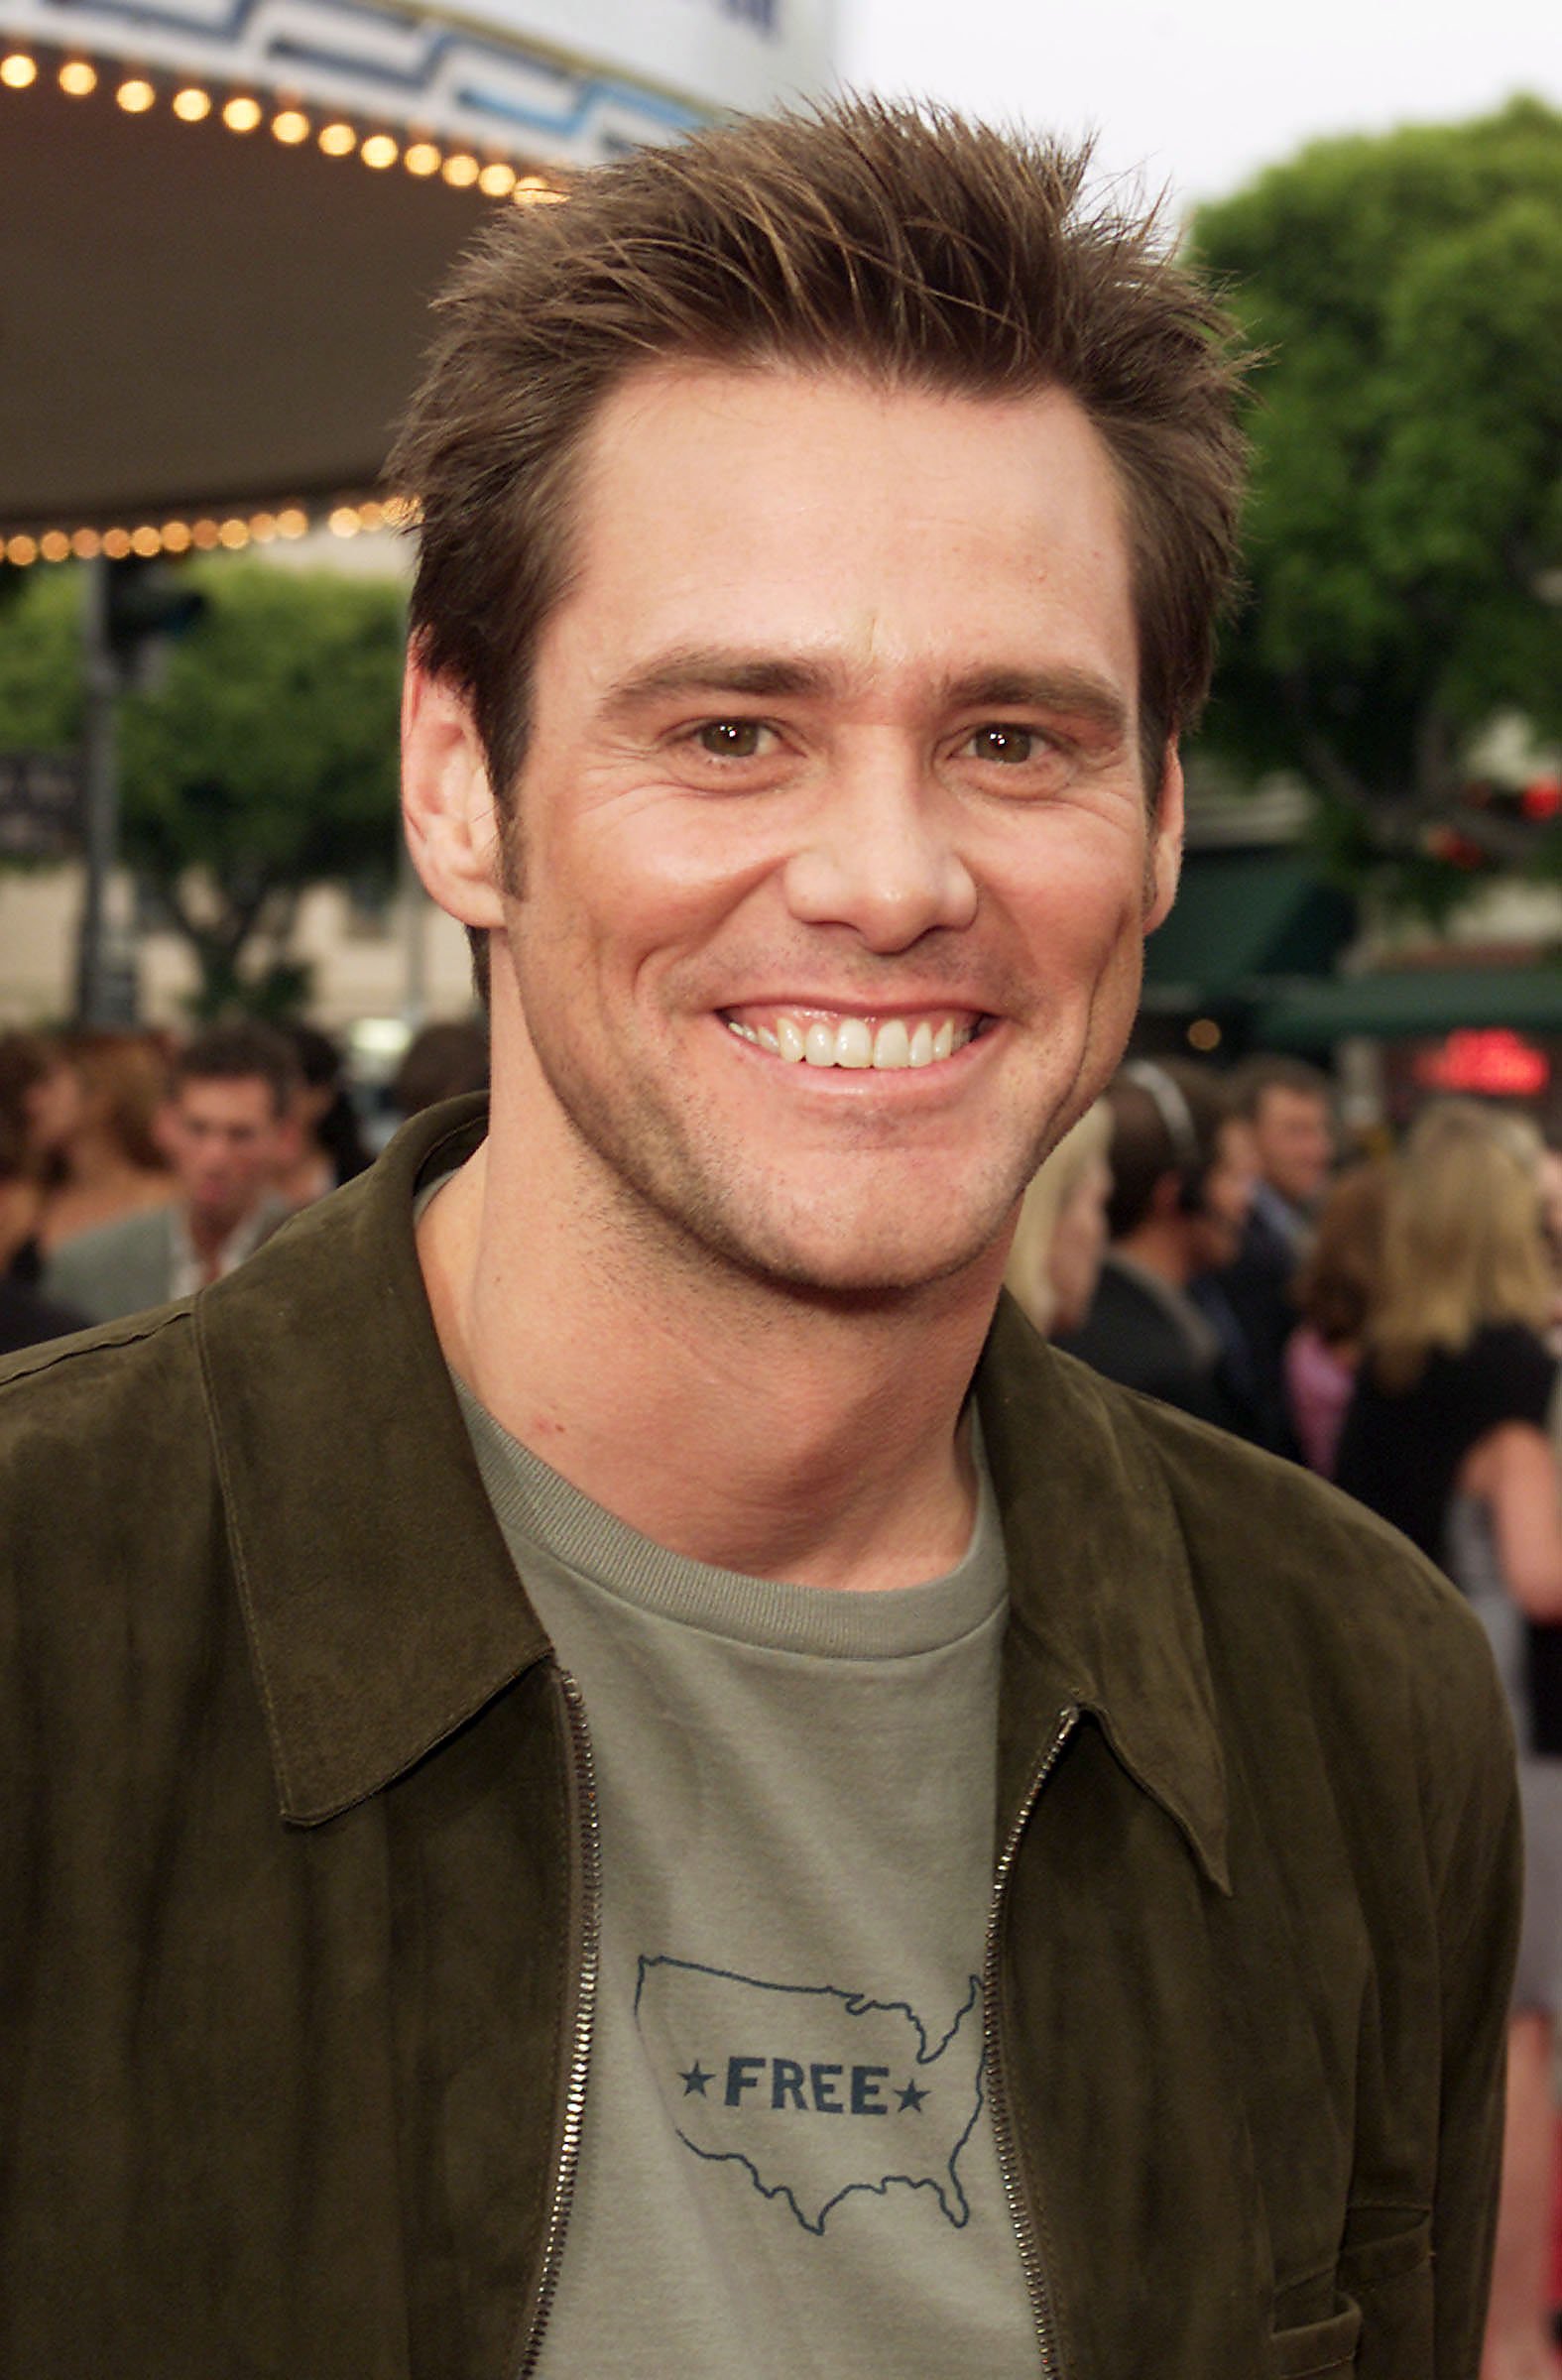 Jim Carrey at the Village Theater in Westwood, California. on June 15, 2000 | Source: Getty Images